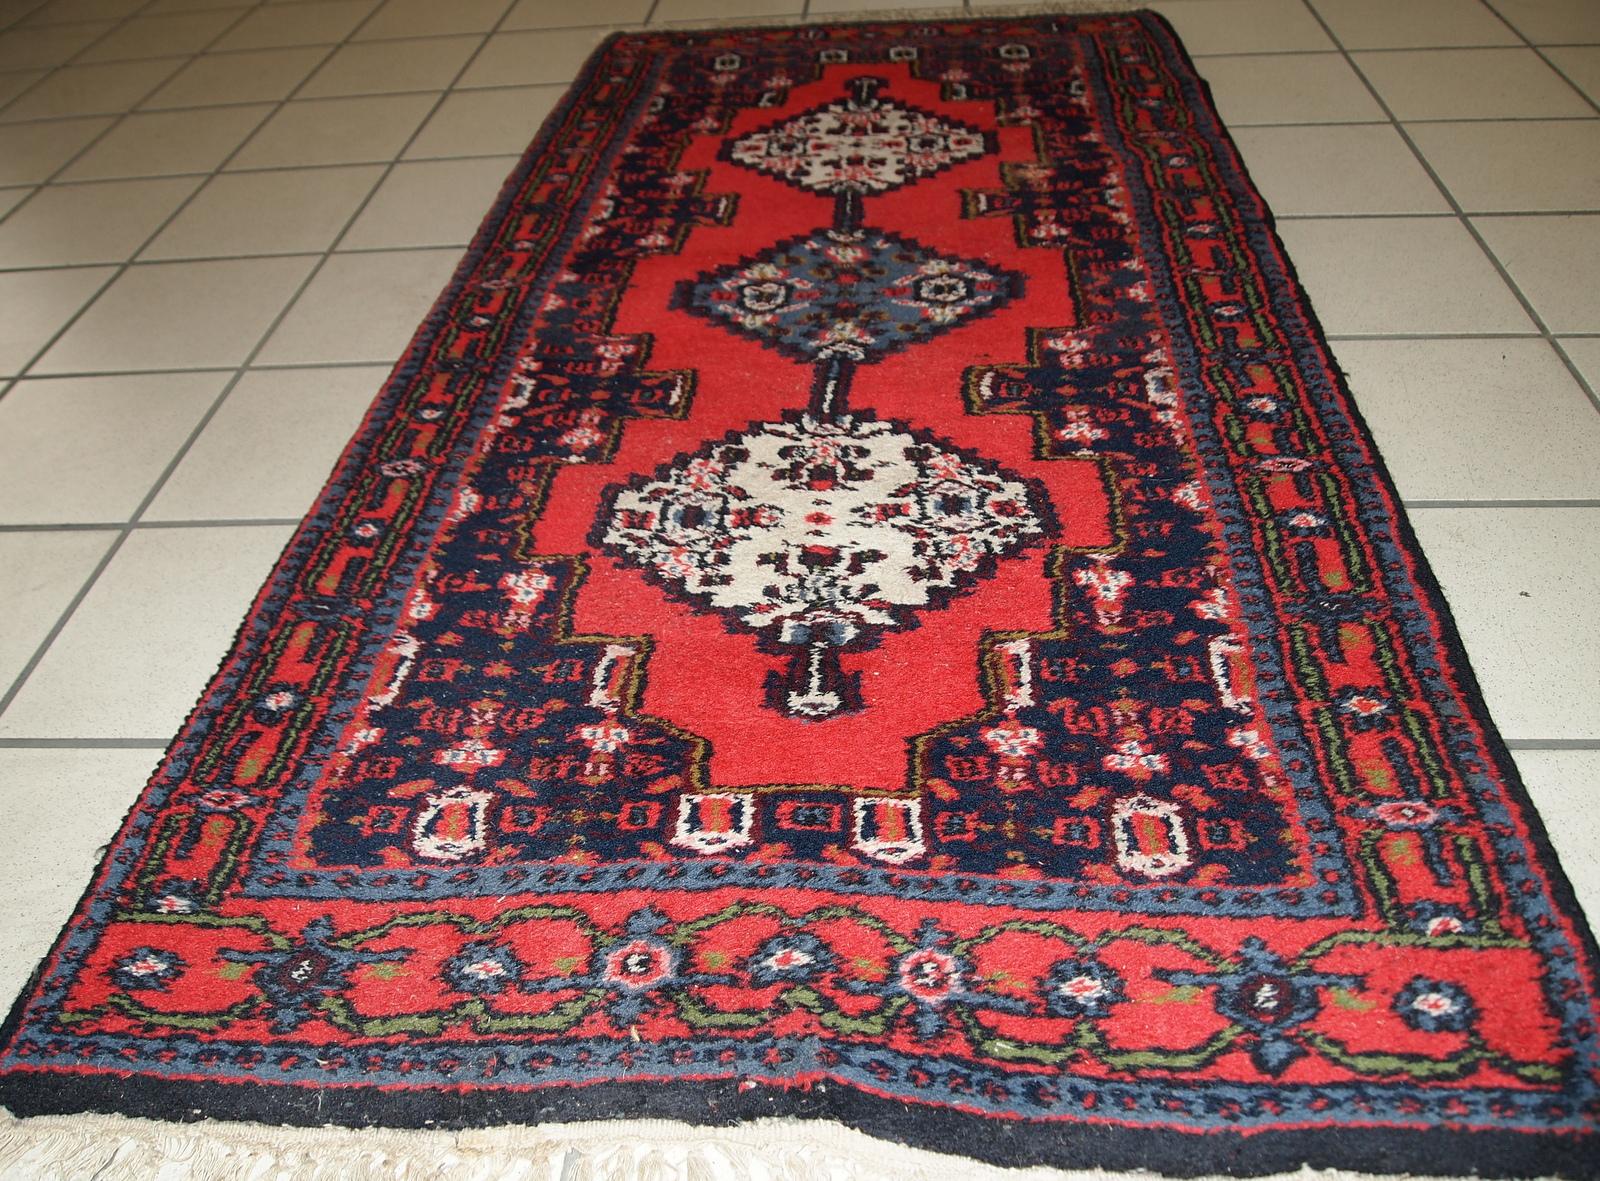 Handmade vintage Hamadan style rug in bright red color. The rug is in original good condition from the end of 20th century.

?-Condition: original good,

-circa 1970s,

-Size: 2.2' x 4.5' (69cm x 136cm),

-Material: wool,

-Country of